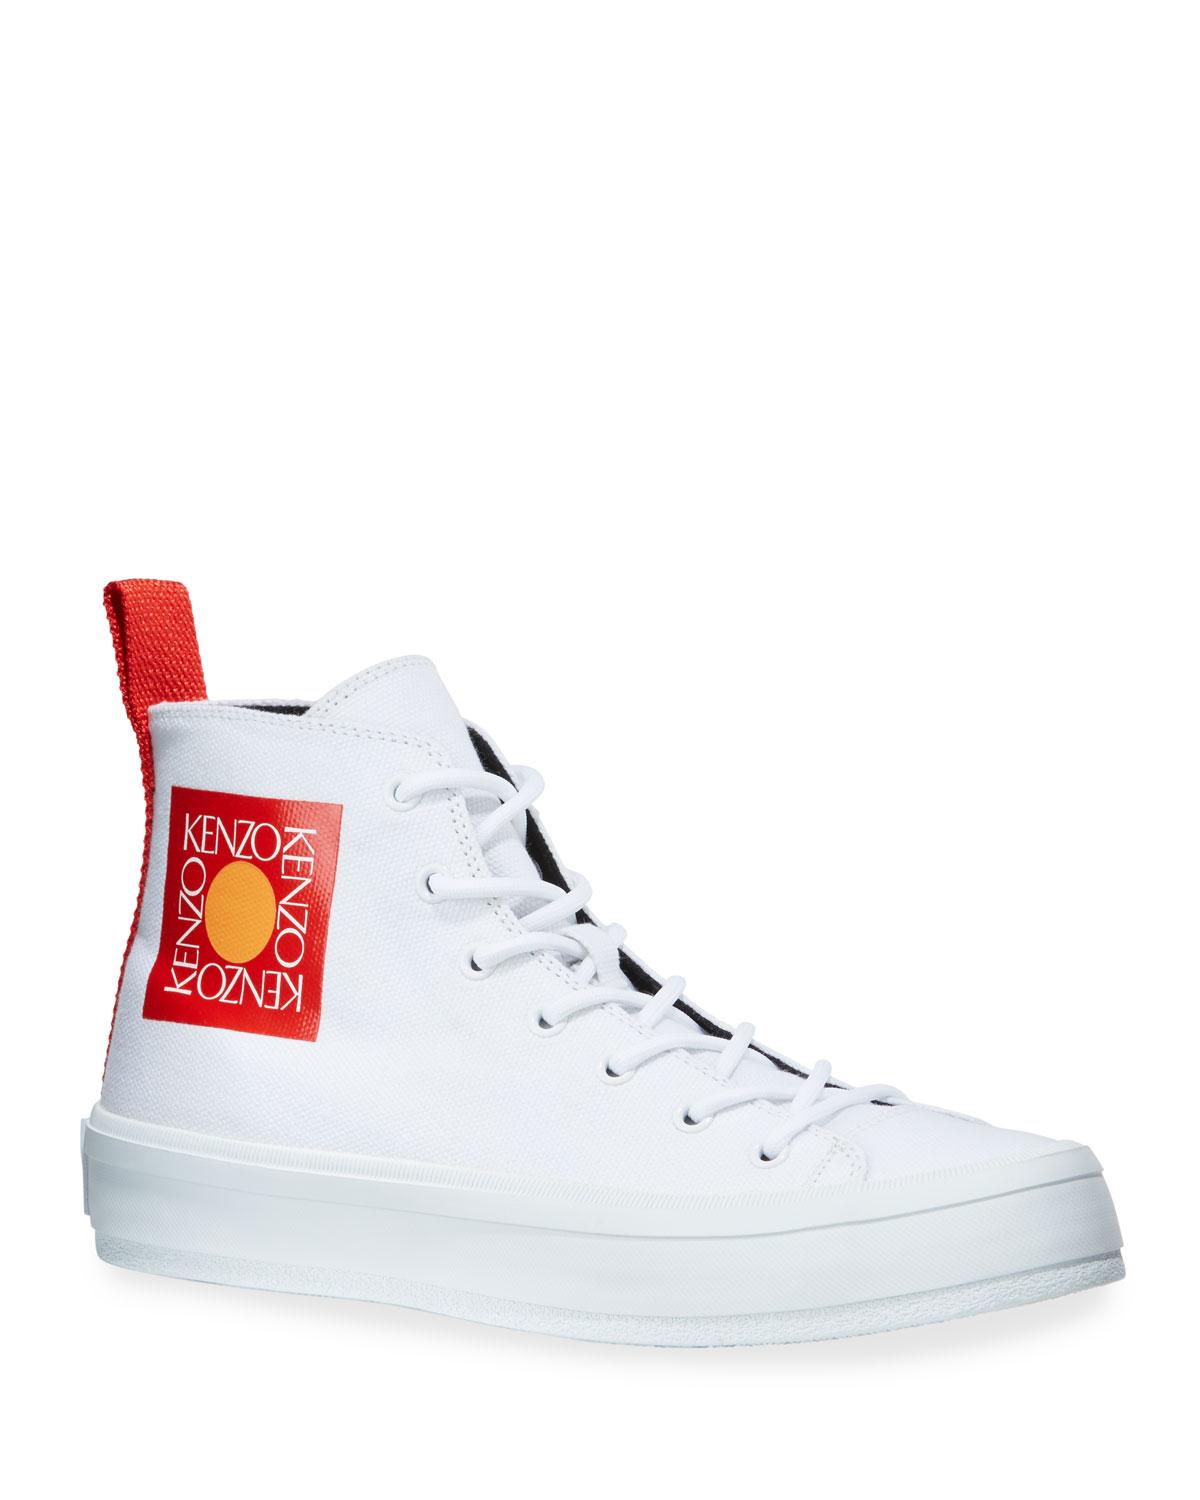 KENZO Men's Square Logo High-top Canvas Sneakers in White for Men - Lyst